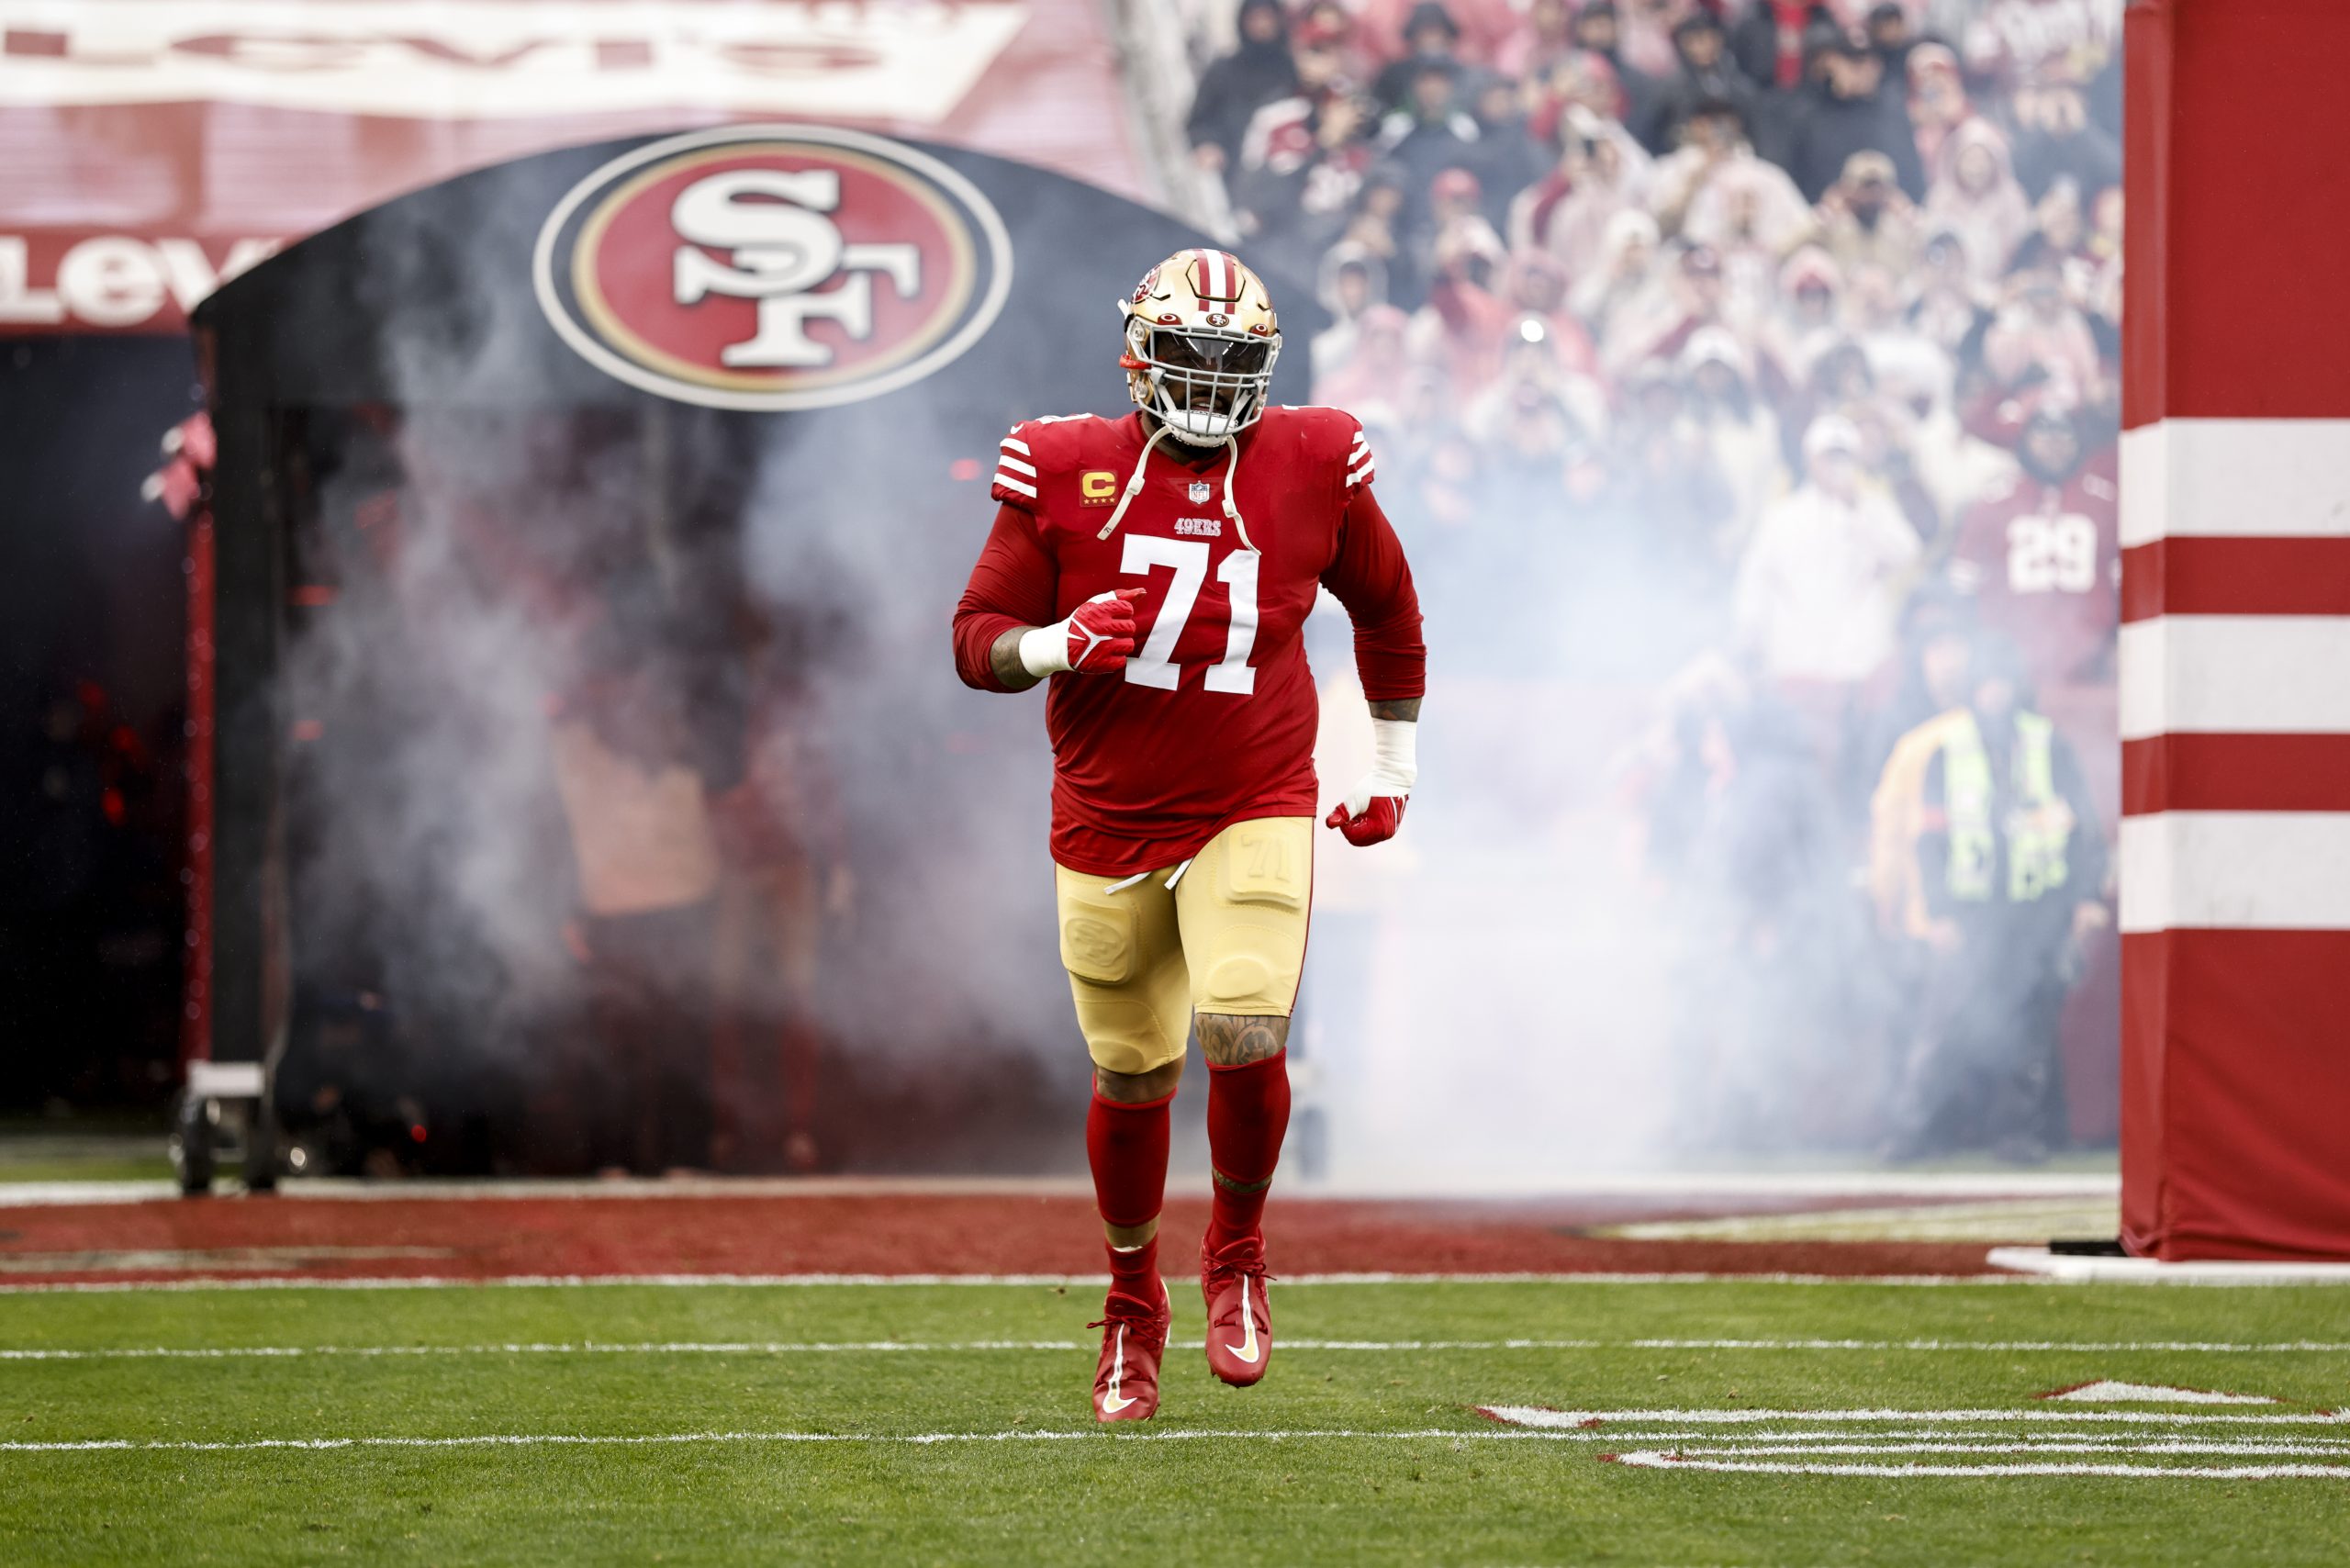 Trent Williams #71 of the San Francisco 49ers takes the field prior to an NFL football game between...